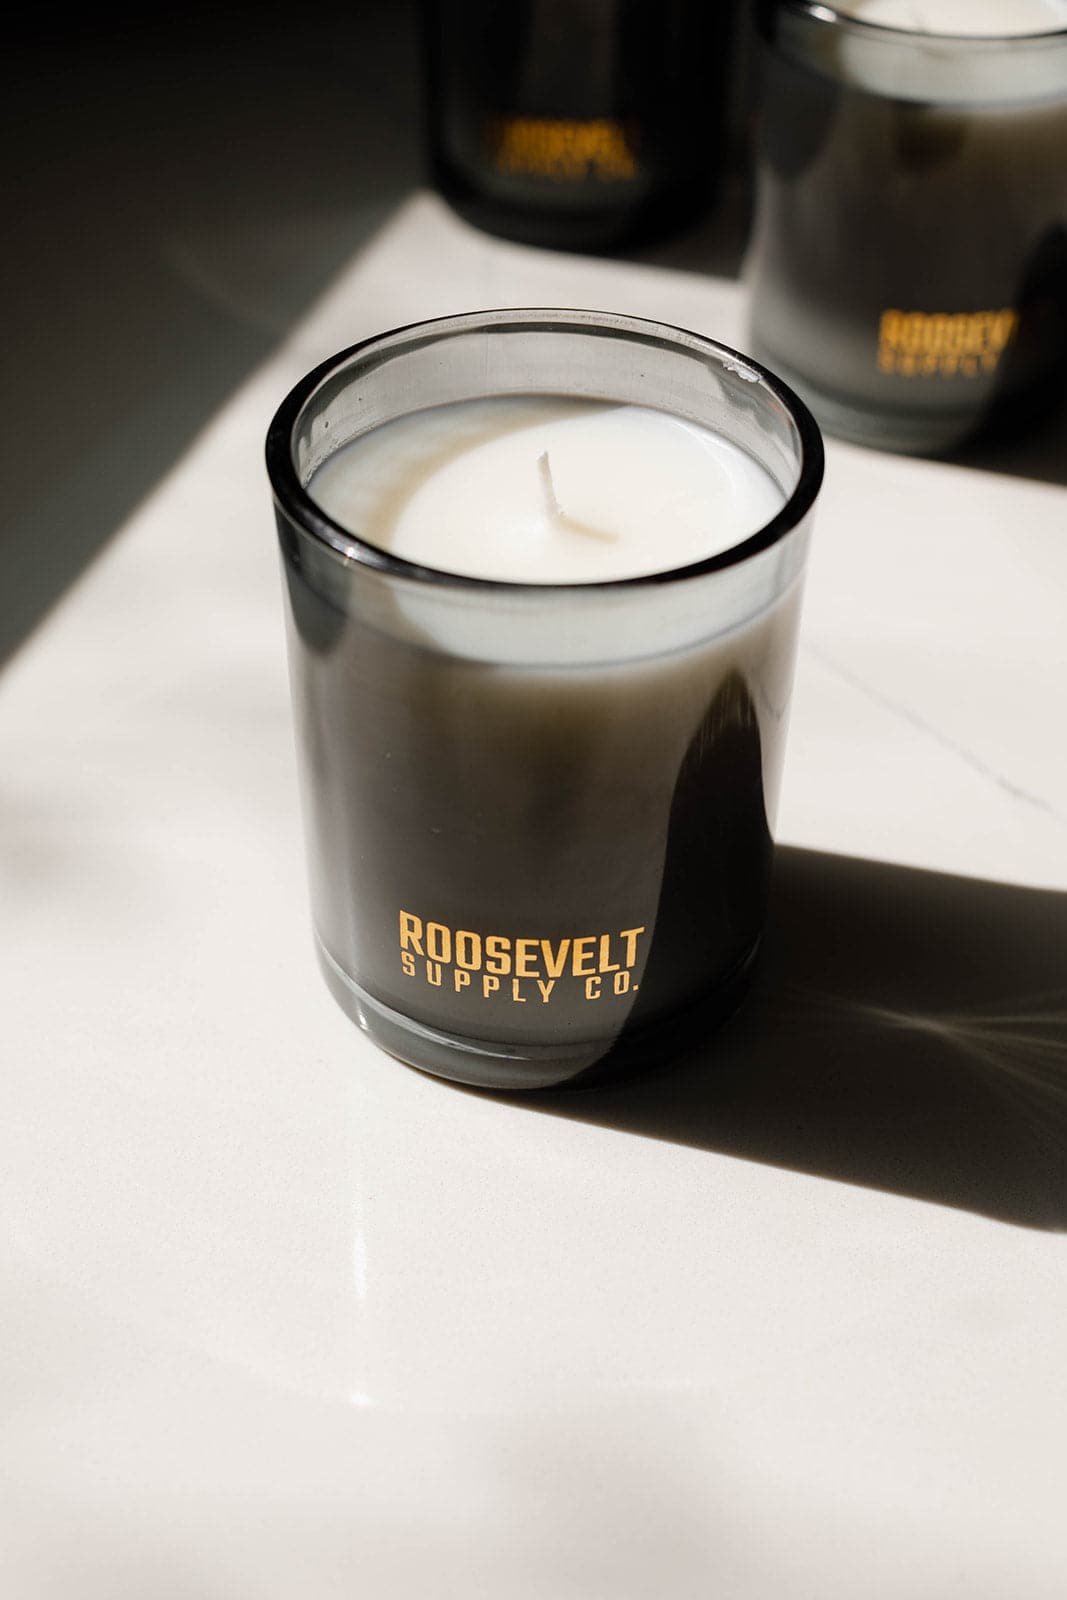 Joshua Tree National Park Candle - The Roosevelts Candle Co.